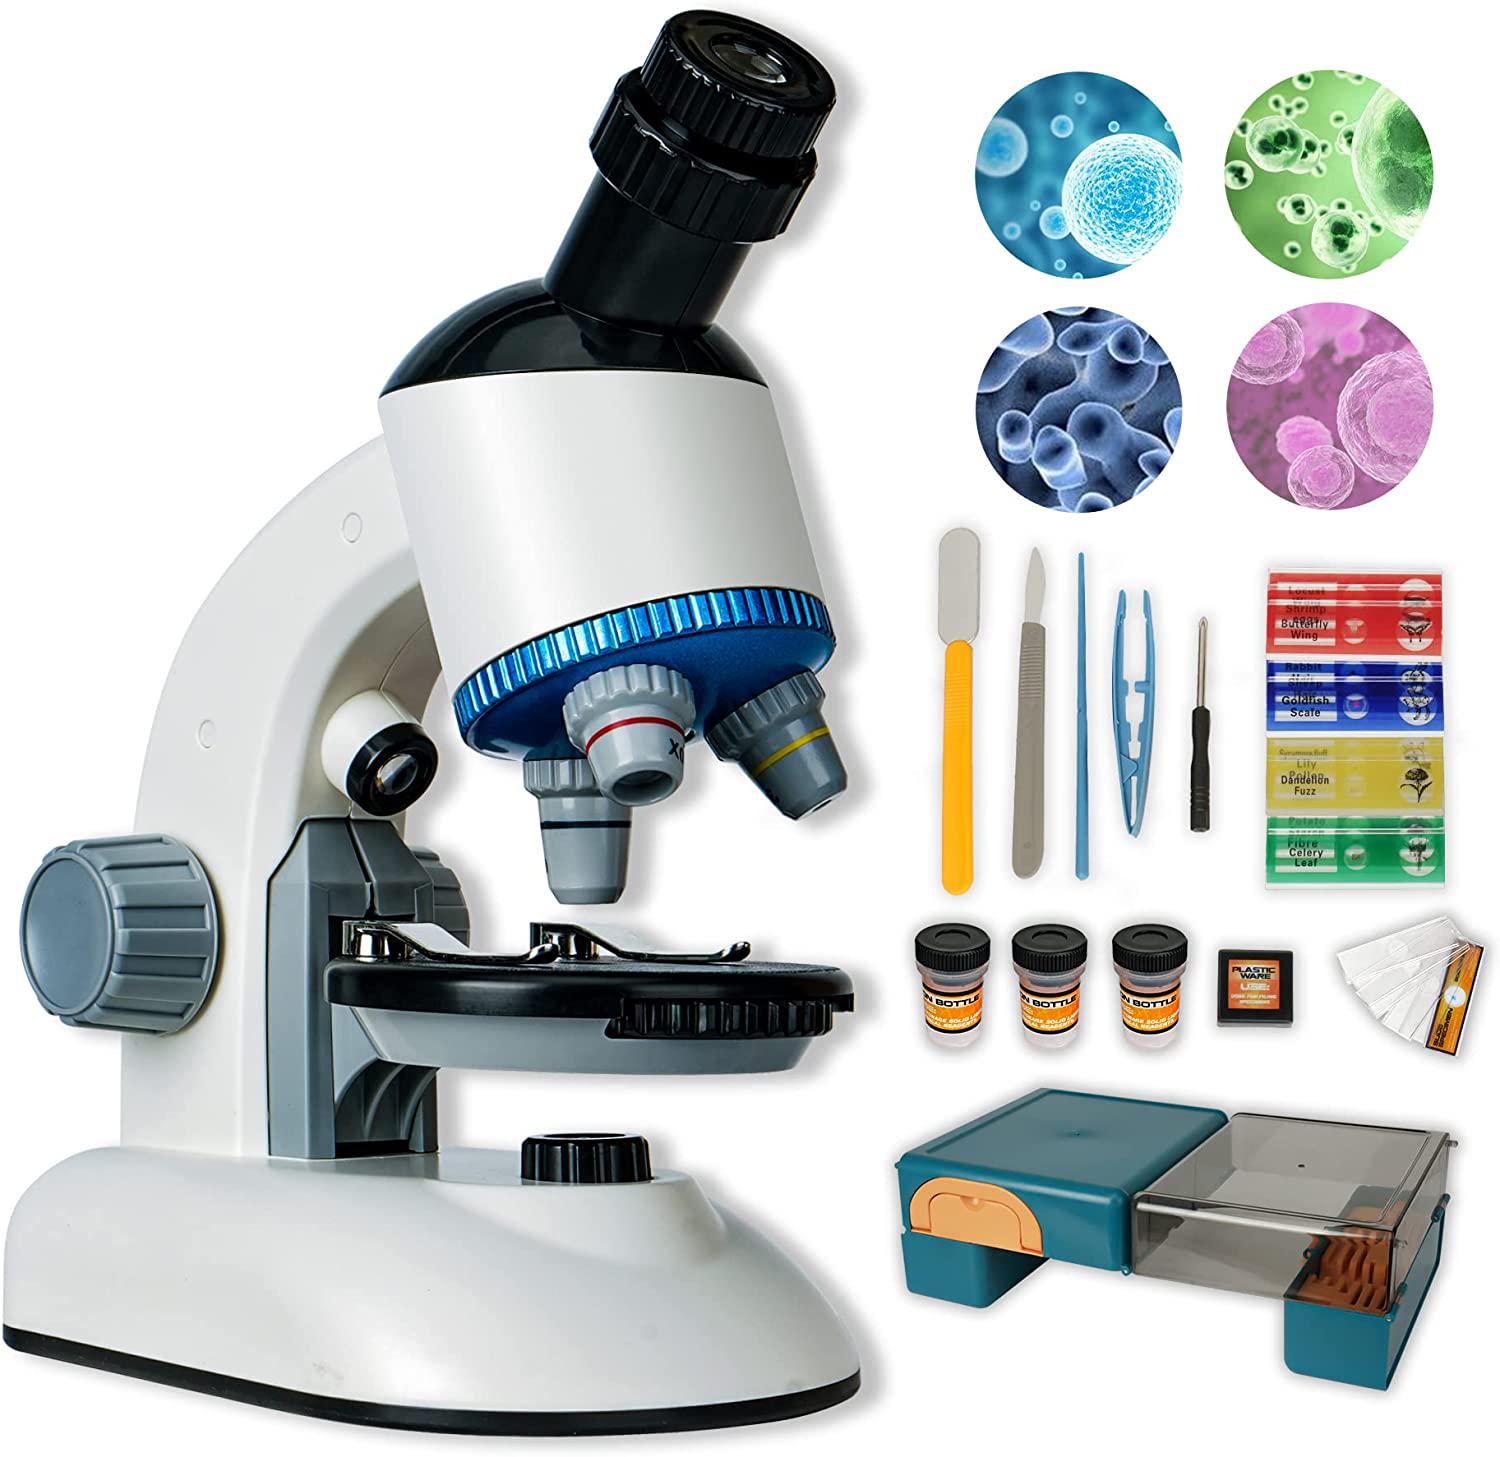 Gaterda, Microscope for Kids, 100X-1200X Microscope Kit for Kids 8-12 5-7 with Blank and Prepared Slides, Rotating Eyepiece, LED Light and Carrying Desk Box, Kids Microscope Science Kit Suitable for Education